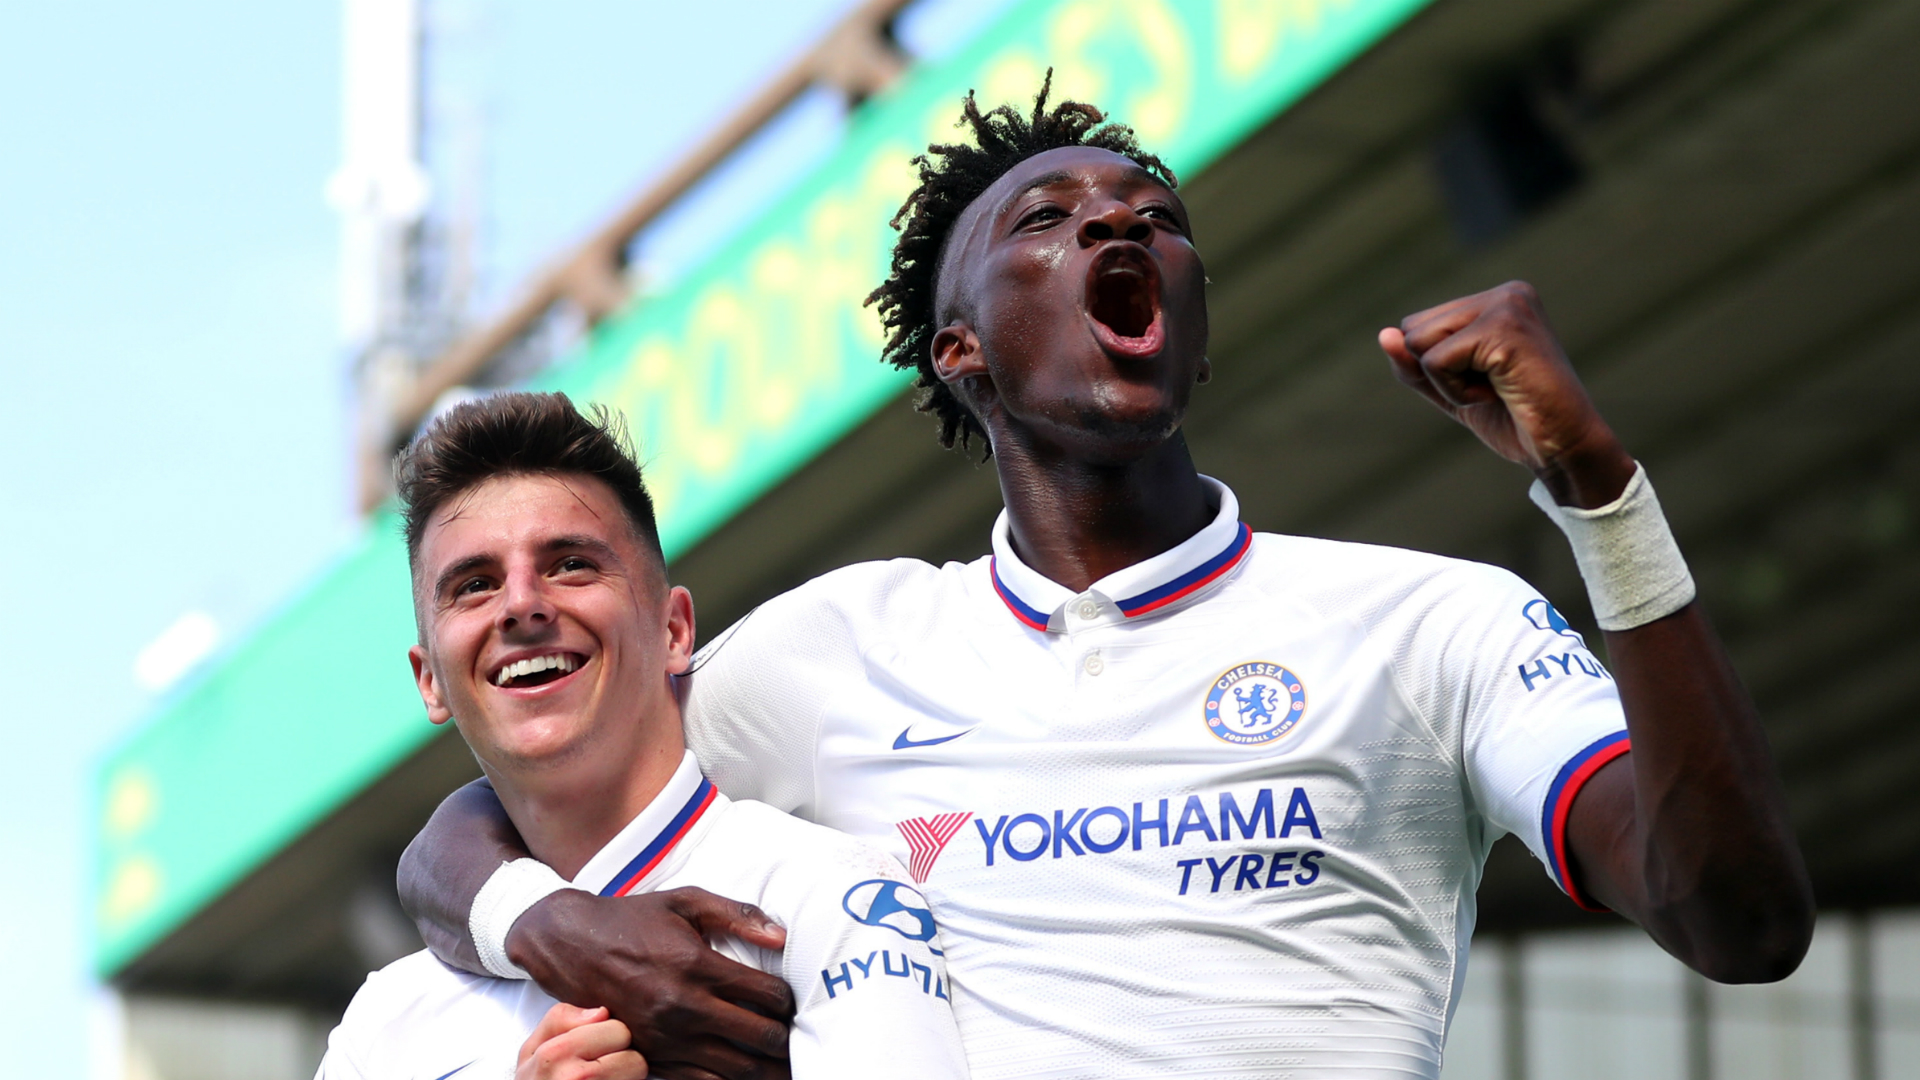 Chelsea's young English players came to the fore as the Blues beat Norwich City 3-2, but will Frank Lampard be given time to develop them?